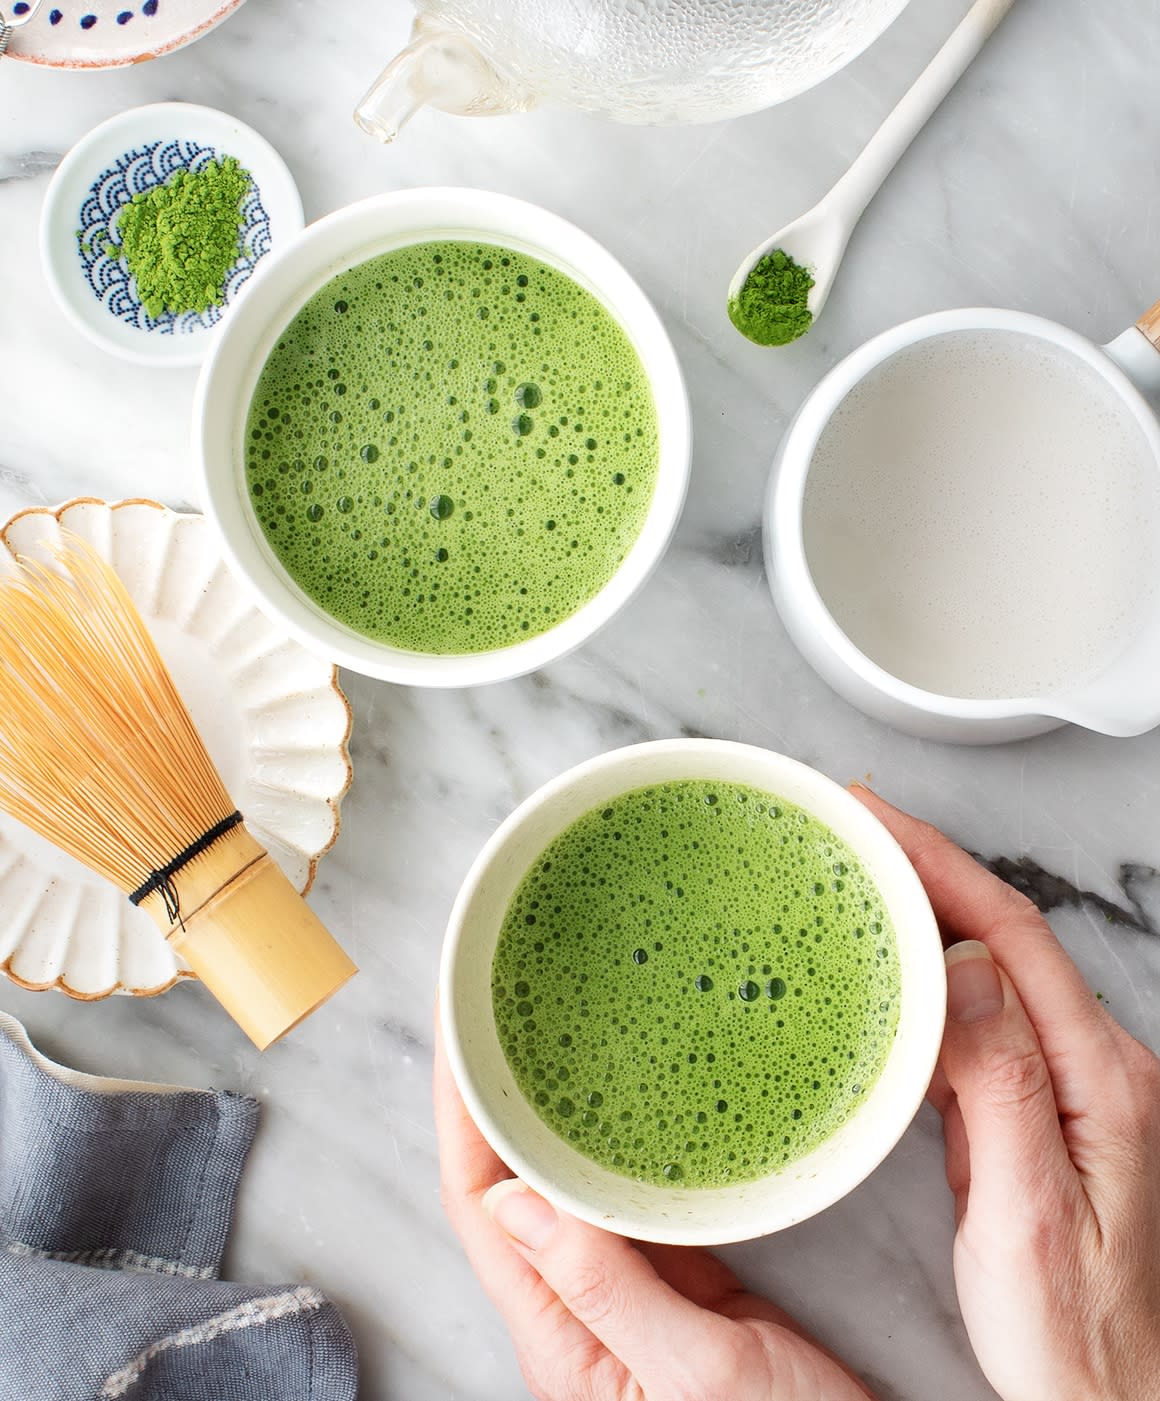 Does anyone here drink Matcha Green Tea? It is proven to relax the body while keeping the mind alert. It really helps you remain mindful and the samurai used to drink it before battle to stay mindful. Also making it requires a lot of presence and patience. It really does wonders for mindfulness.